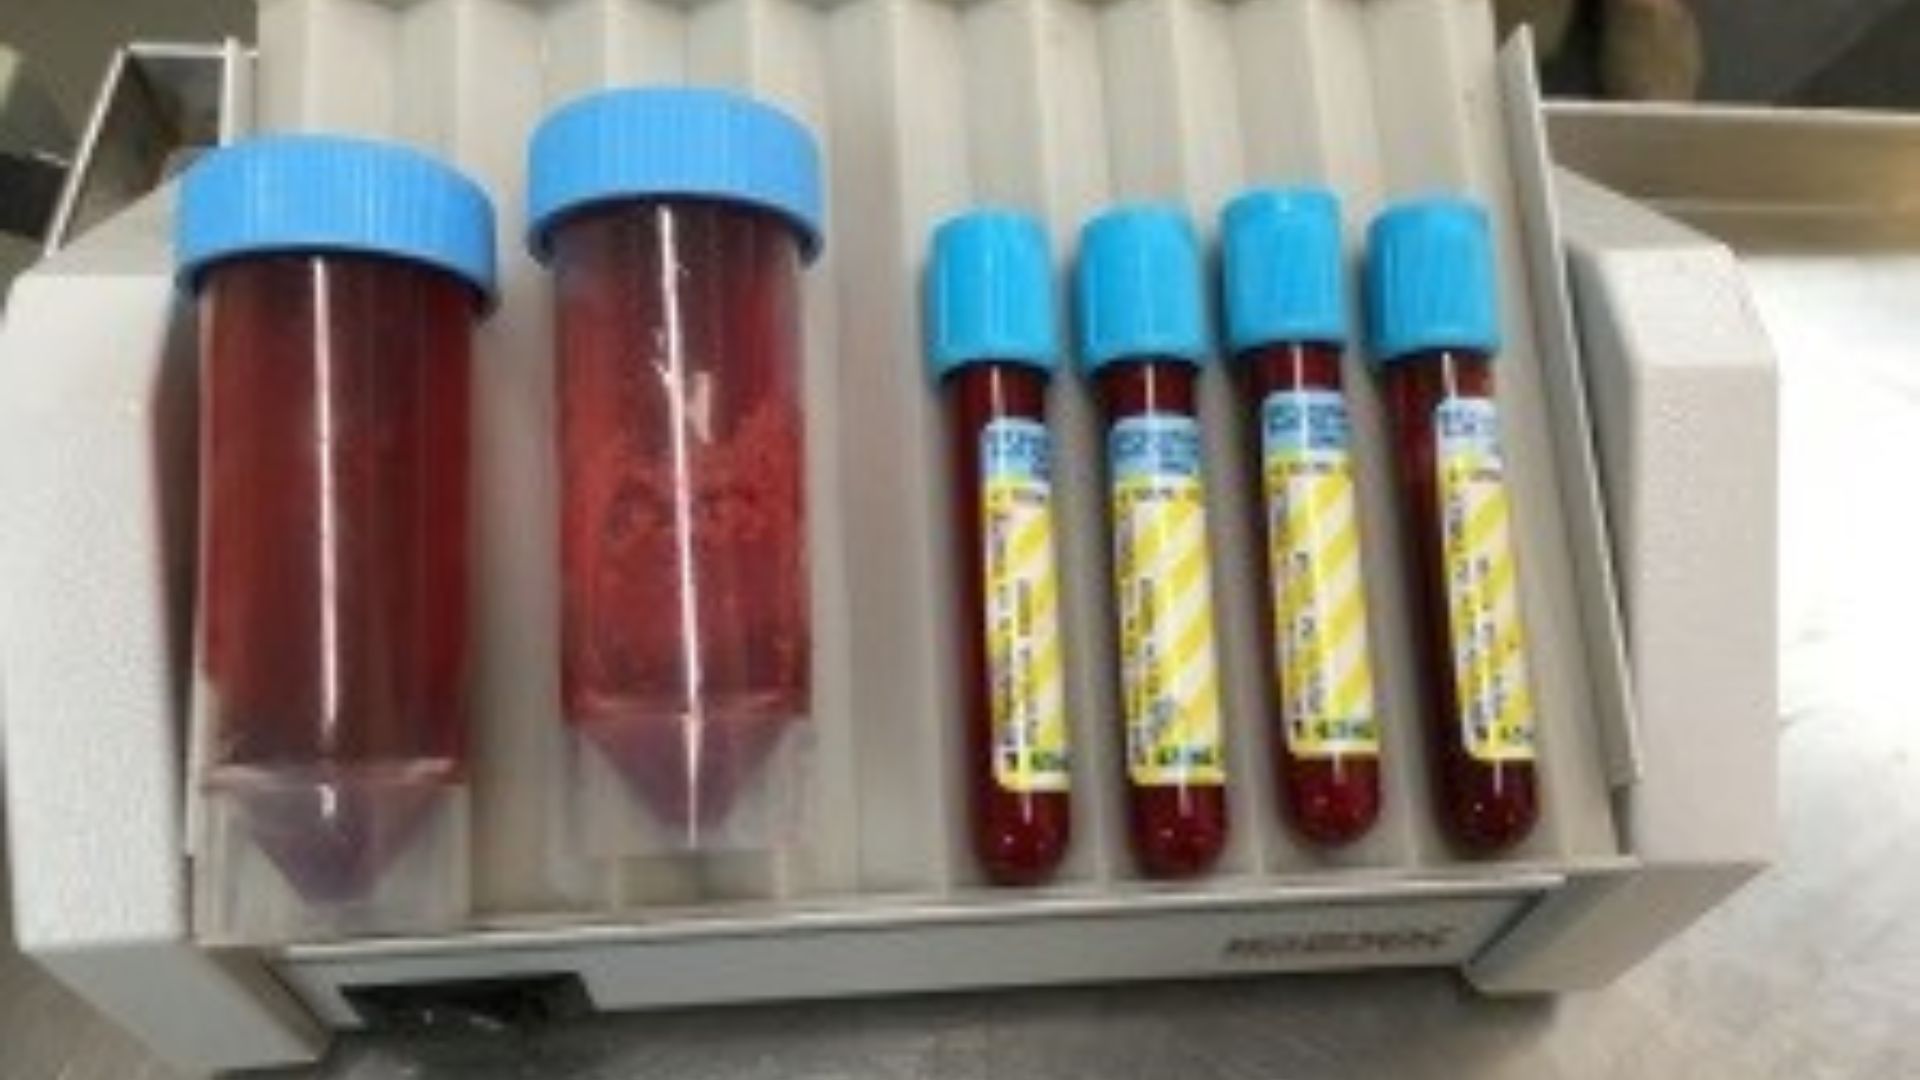 a group of test tubes in a plastic container